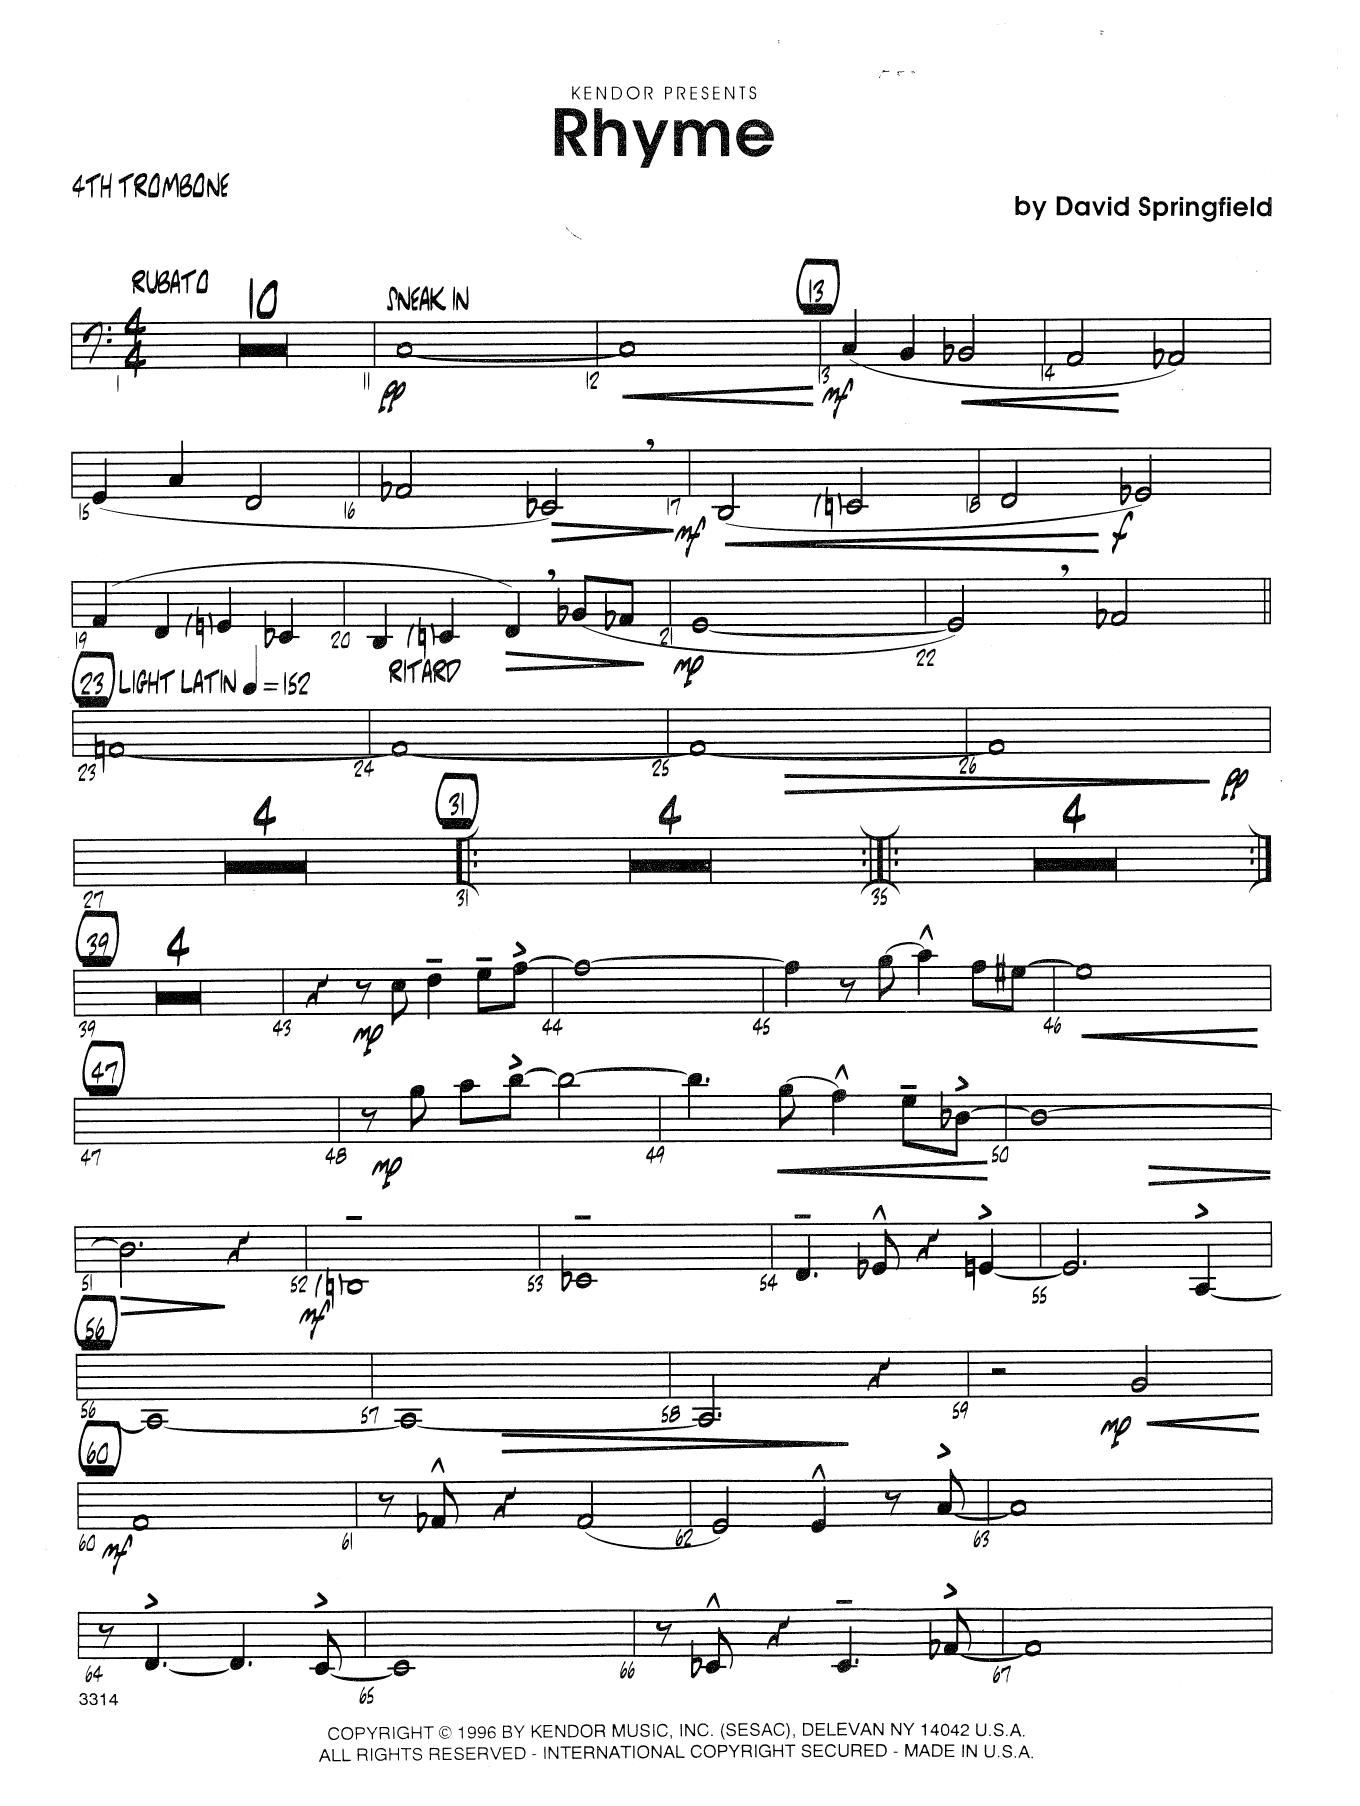 Download Dave Springfield Rhyme - 4th Trombone Sheet Music